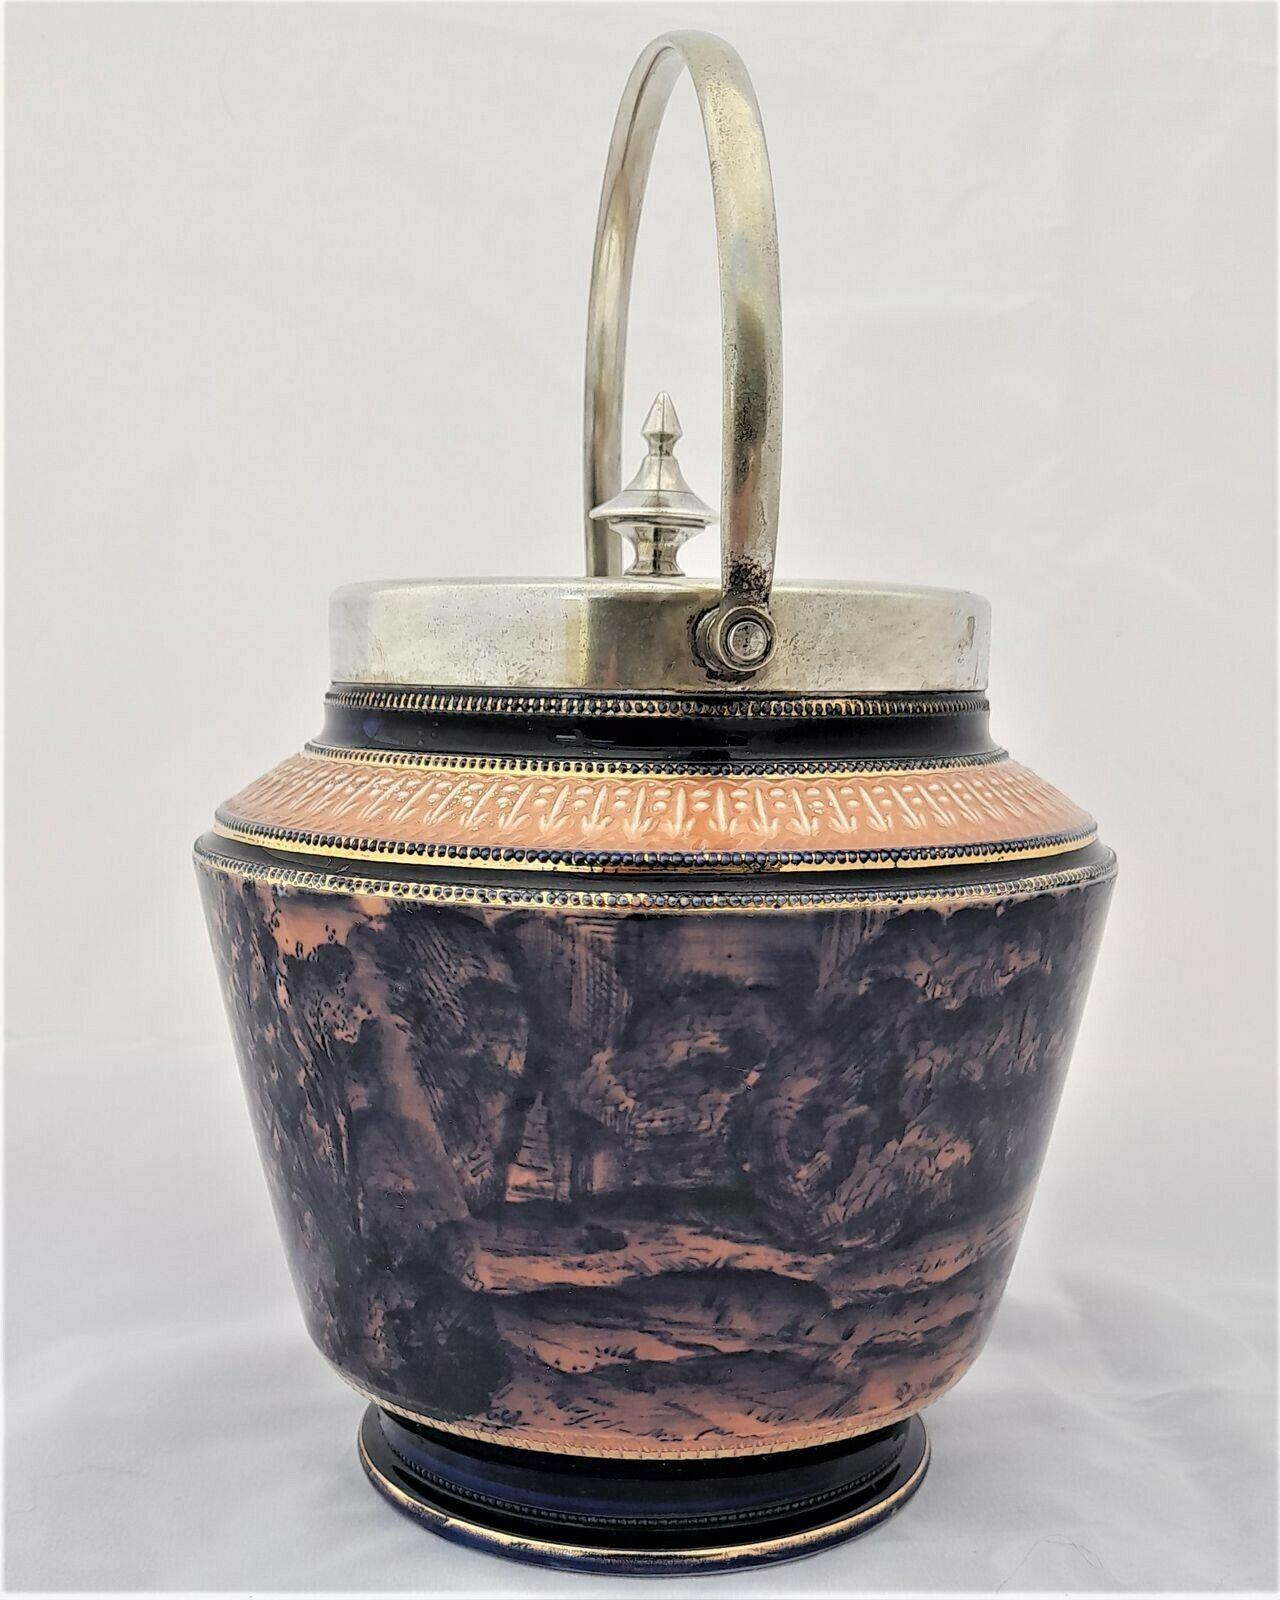 Antique Pottery Biscuit Barrel EPNS Fittings Printed Ruins Scene c 1915 W Wood